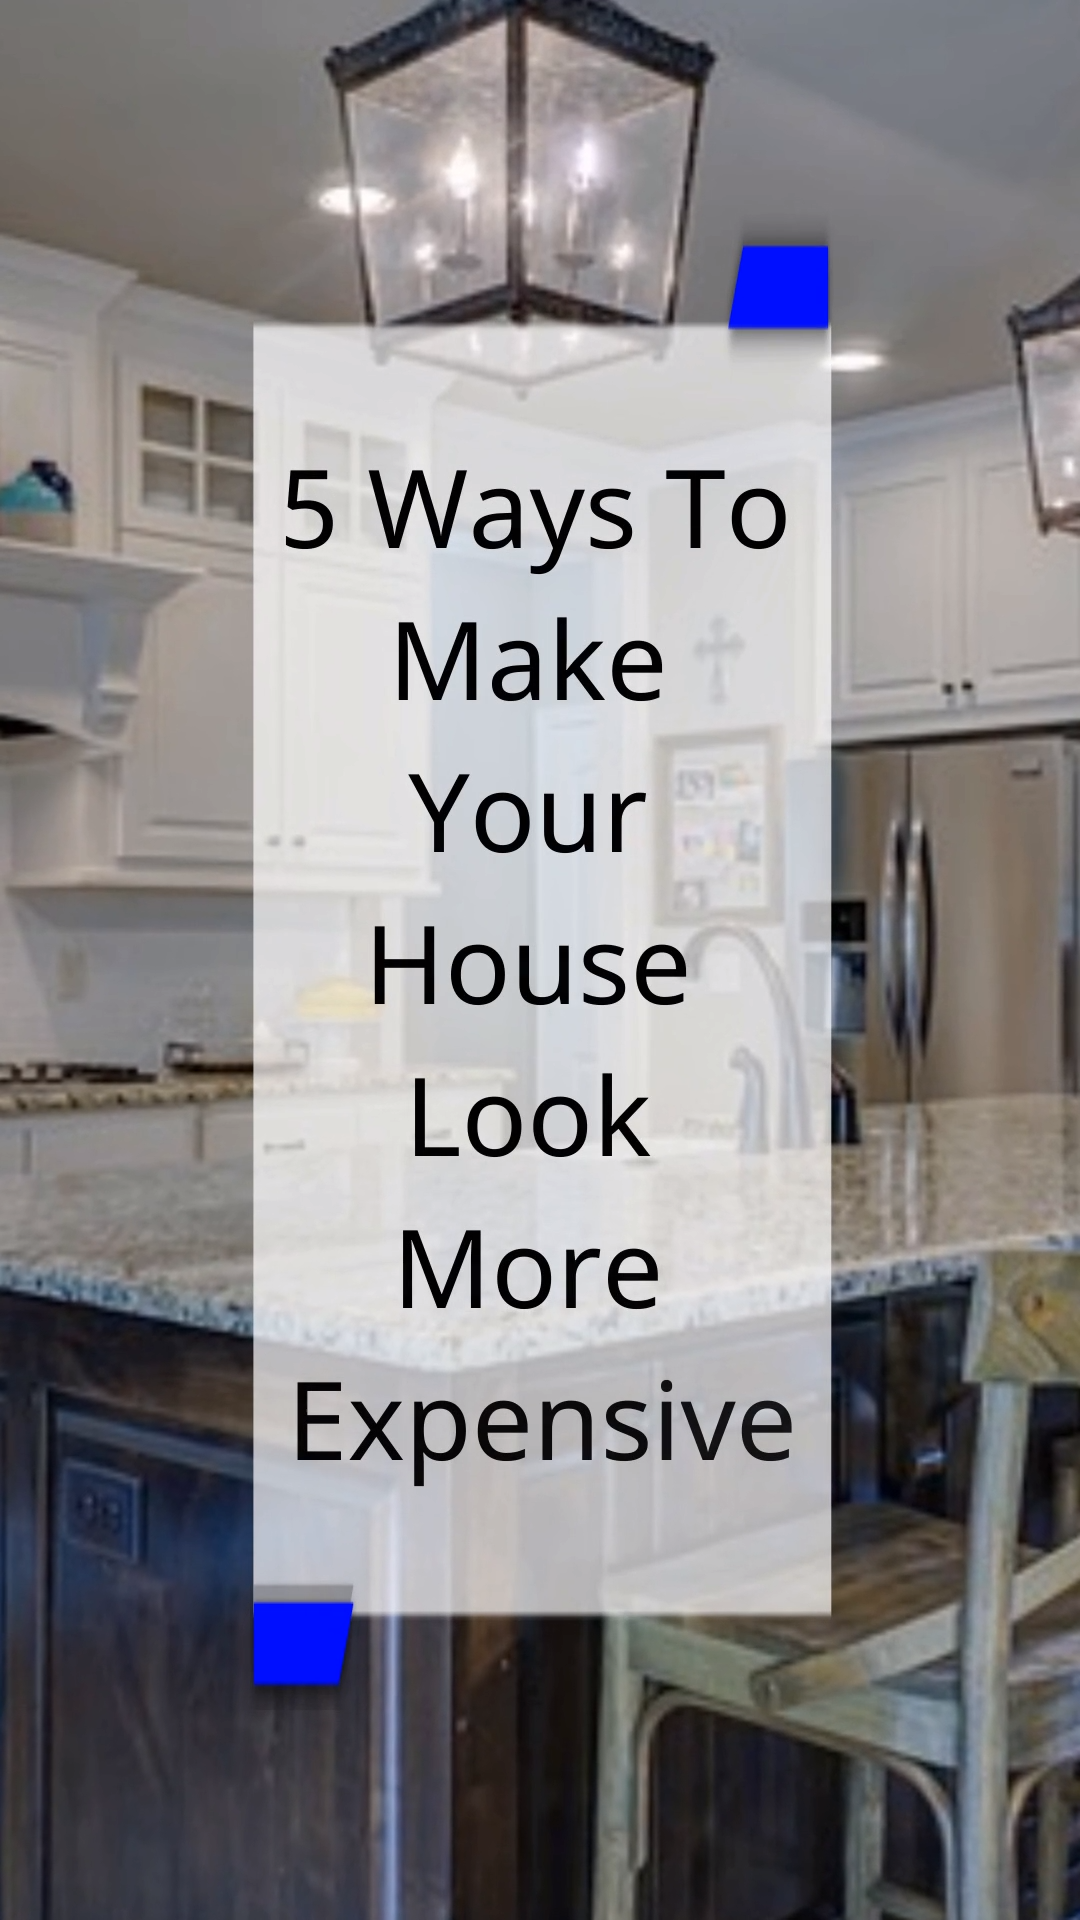 5 Easy Ways To Make Your House Look More Expensive -   diy Apartment decor for renters